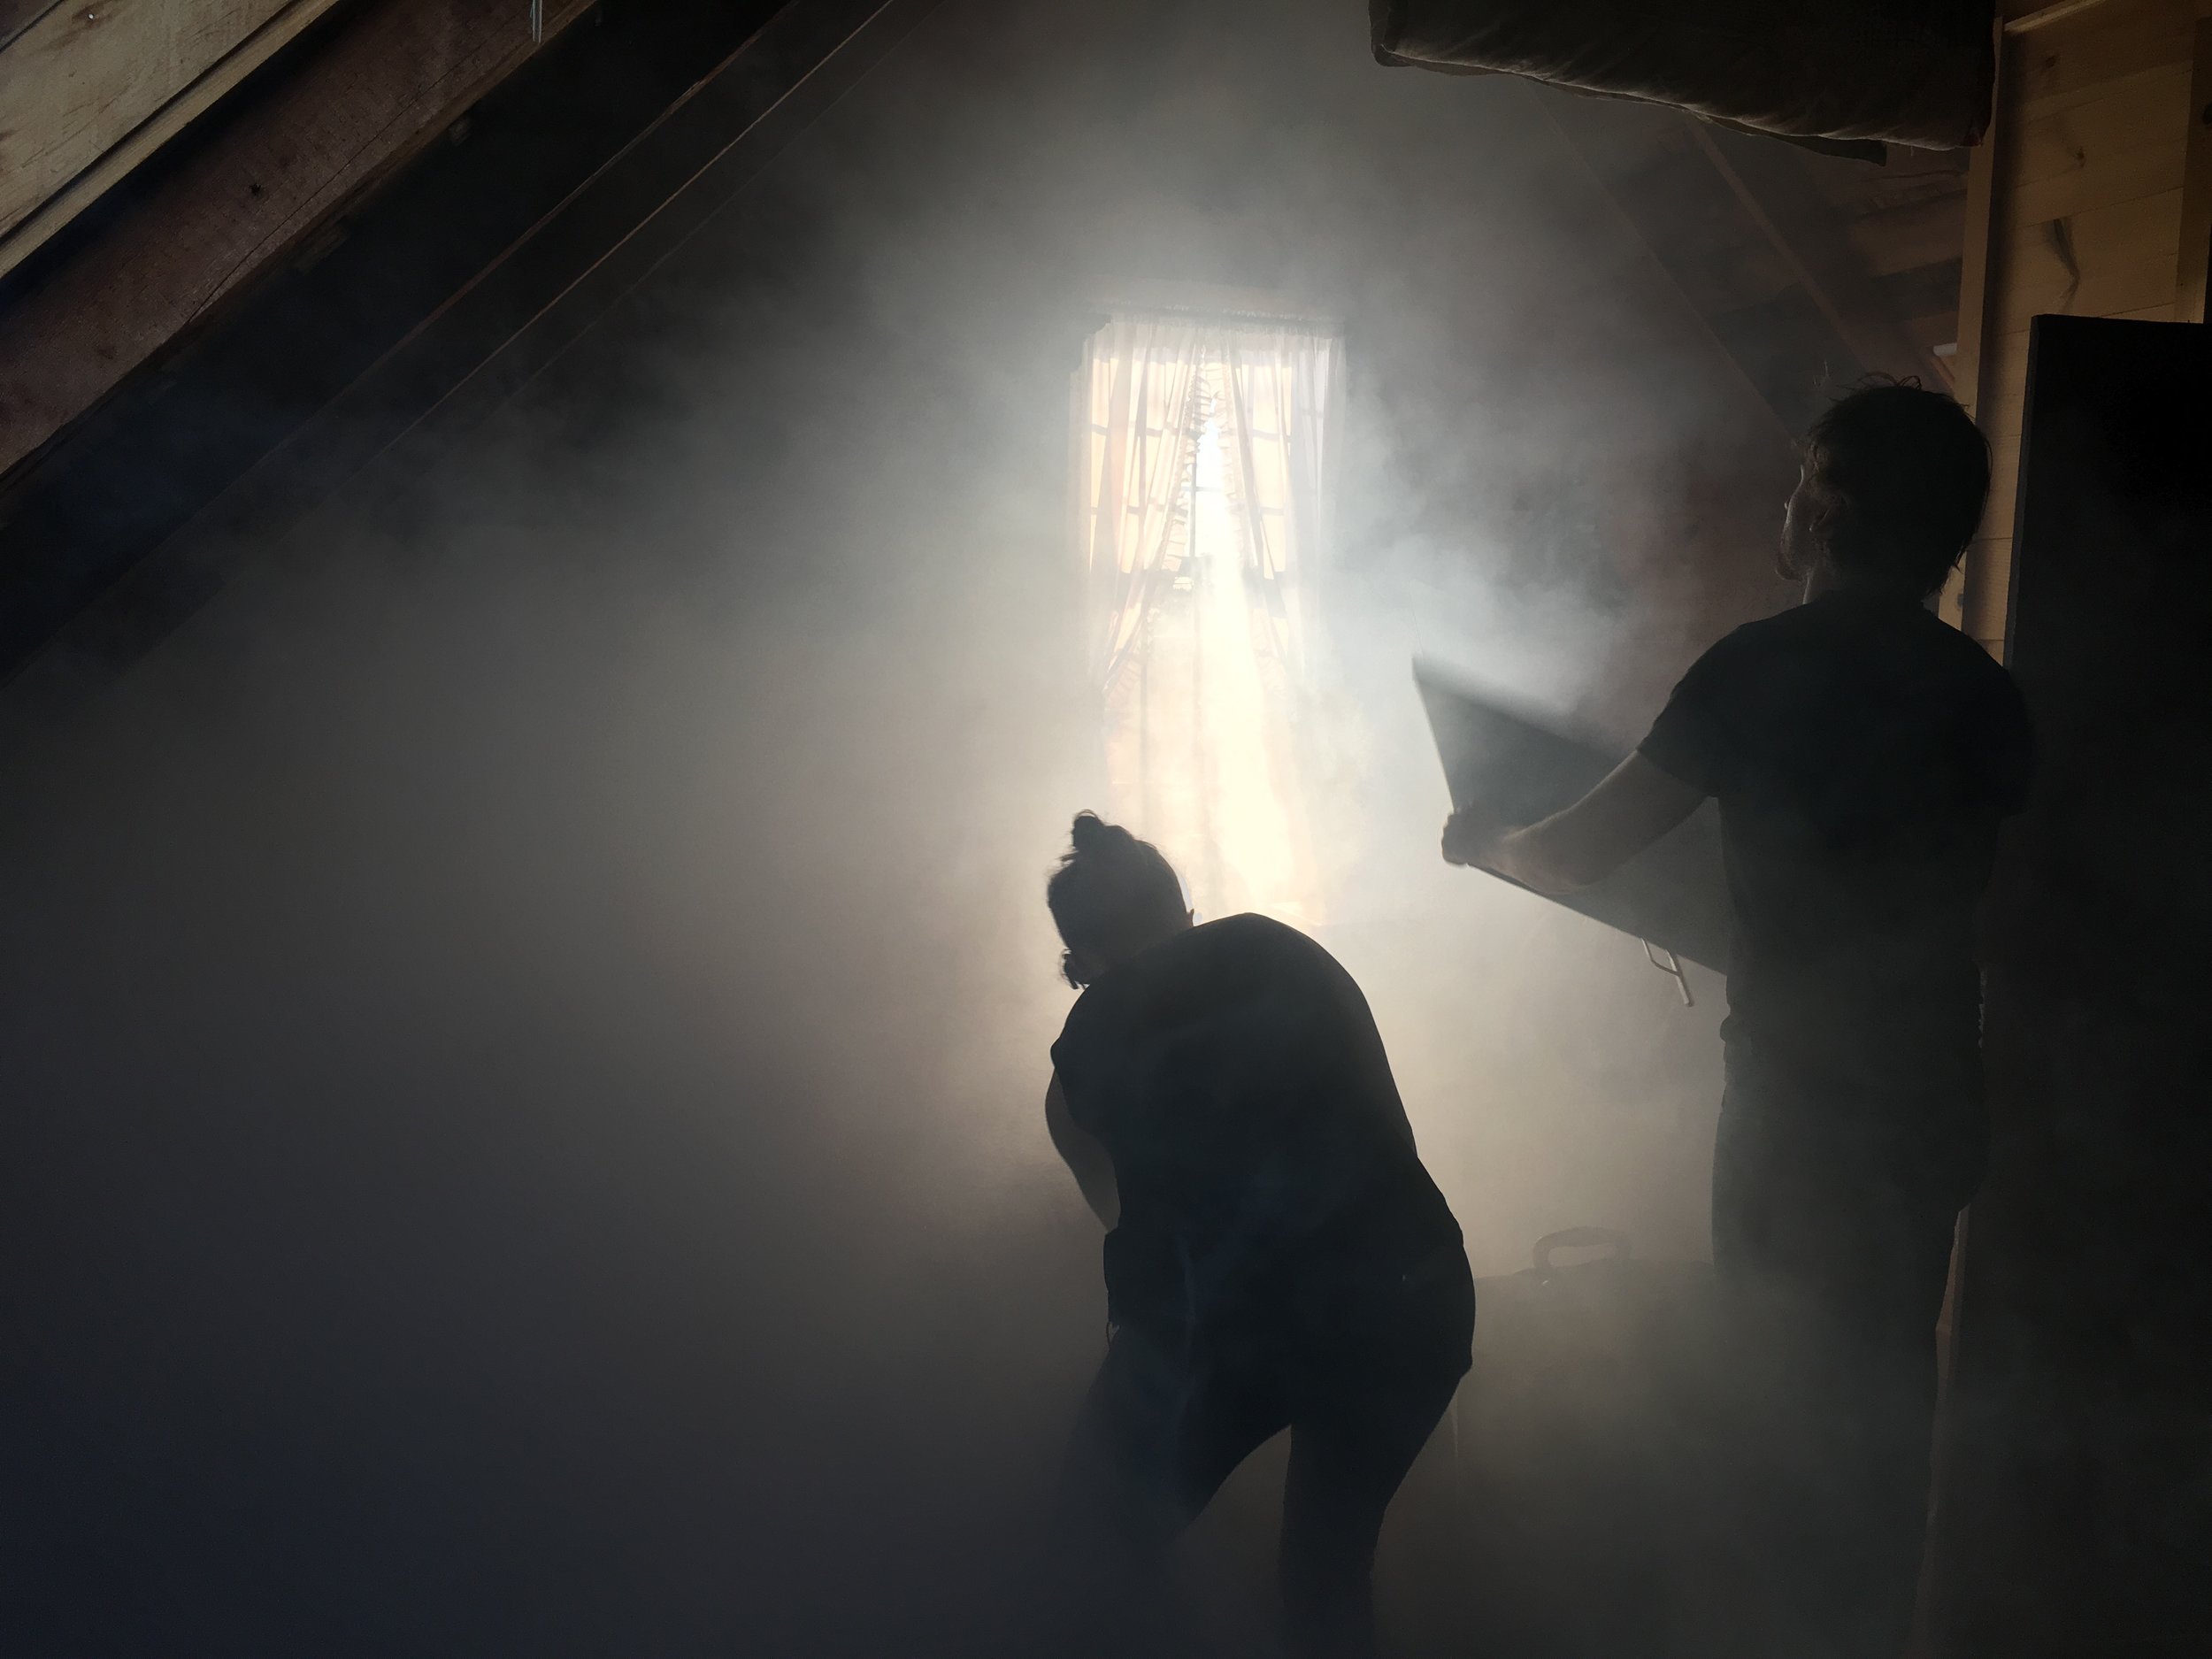 Production designer Ariel Hall and DP Mark Farney spread out the fog at Swan House in Camden